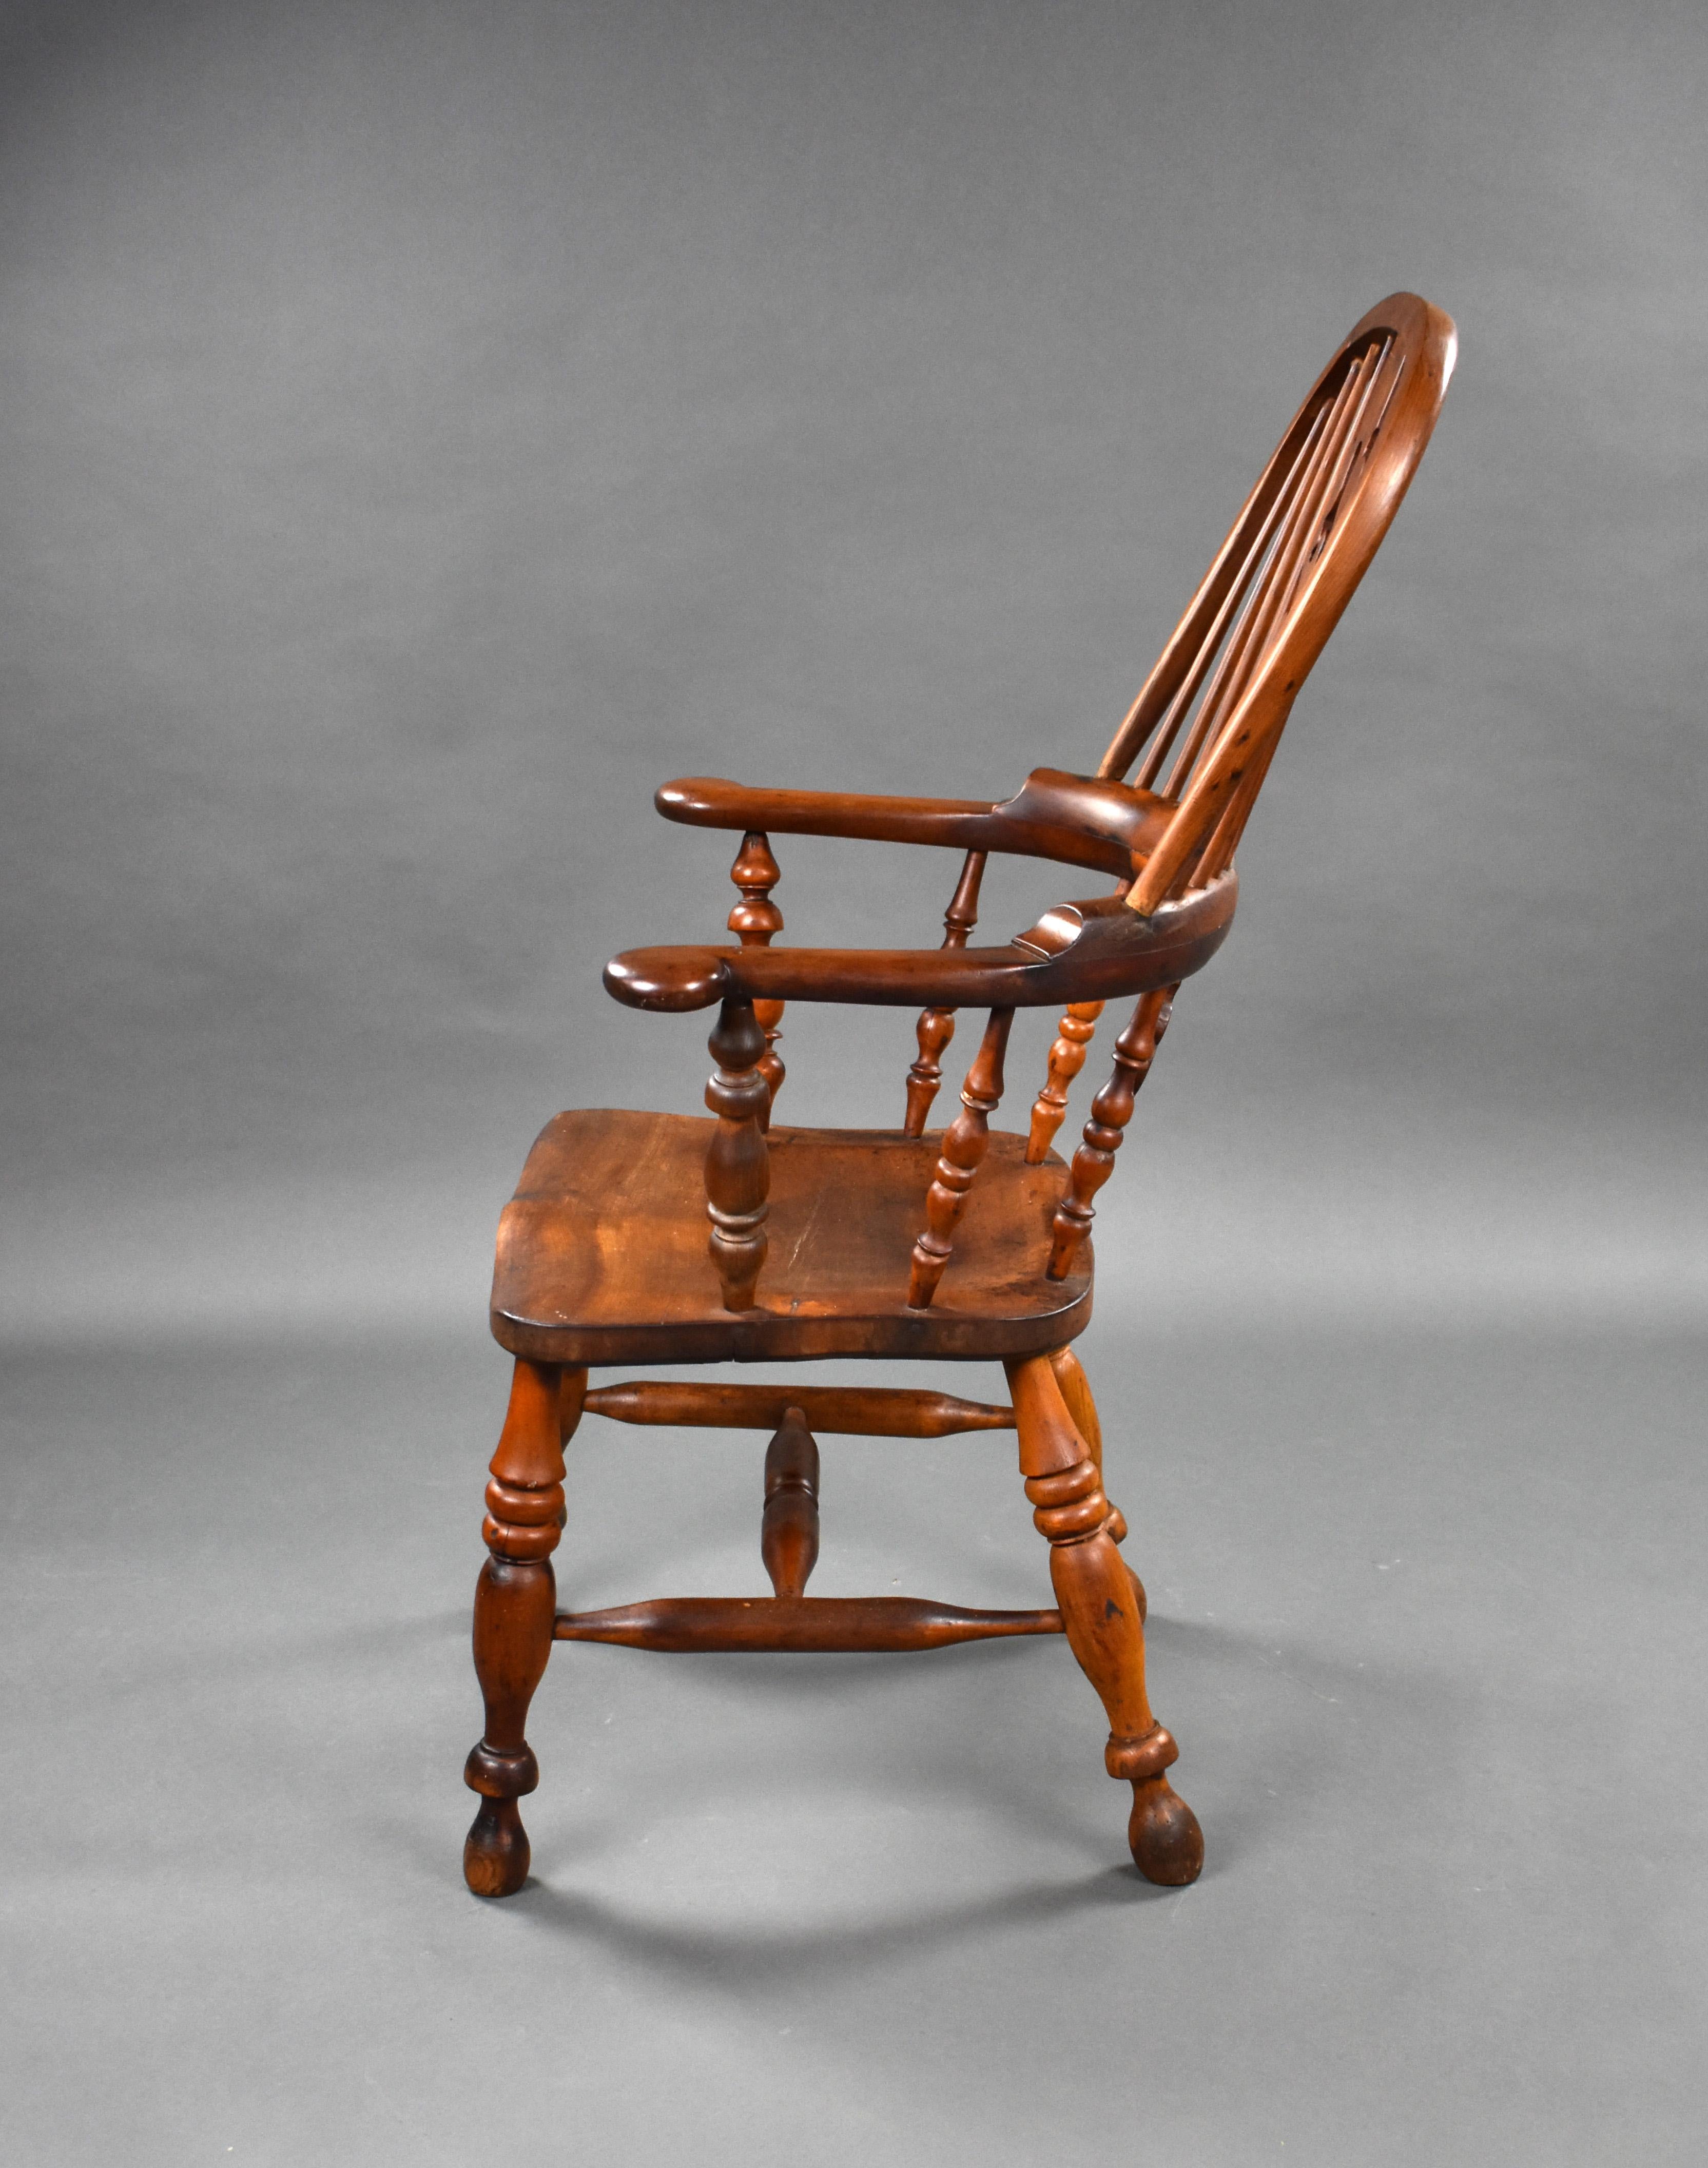 19th Century English Yew Wood High Back Broad Arm Windsor Chair For Sale 1